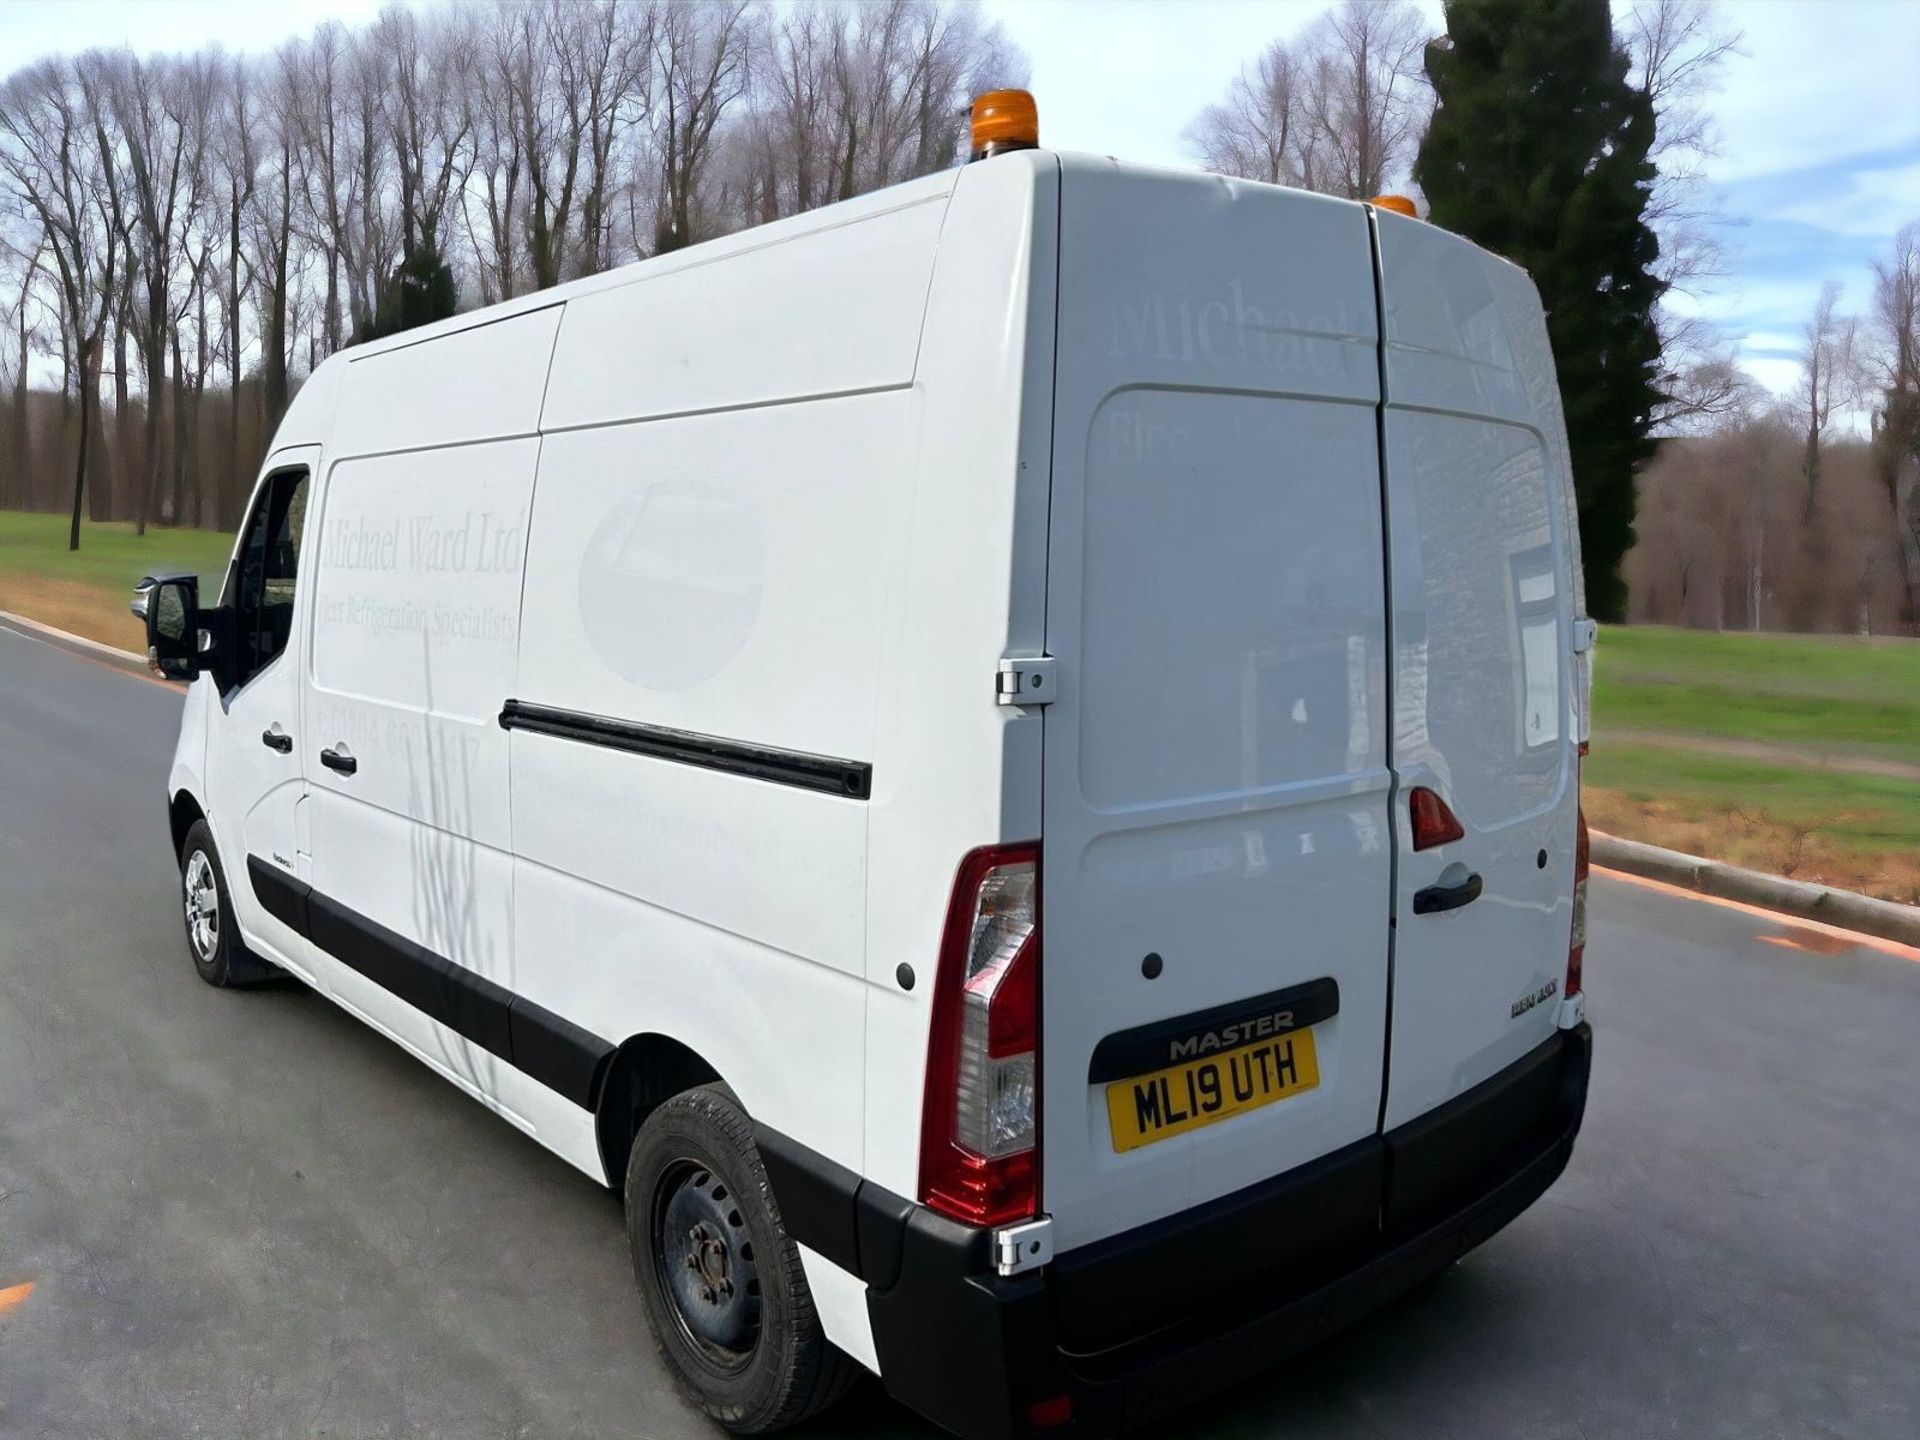 2019-19 REG RENAULT MASTER DCI MWB35 L2H2 -HPI CLEAR - READY FOR WORK! - Image 4 of 14